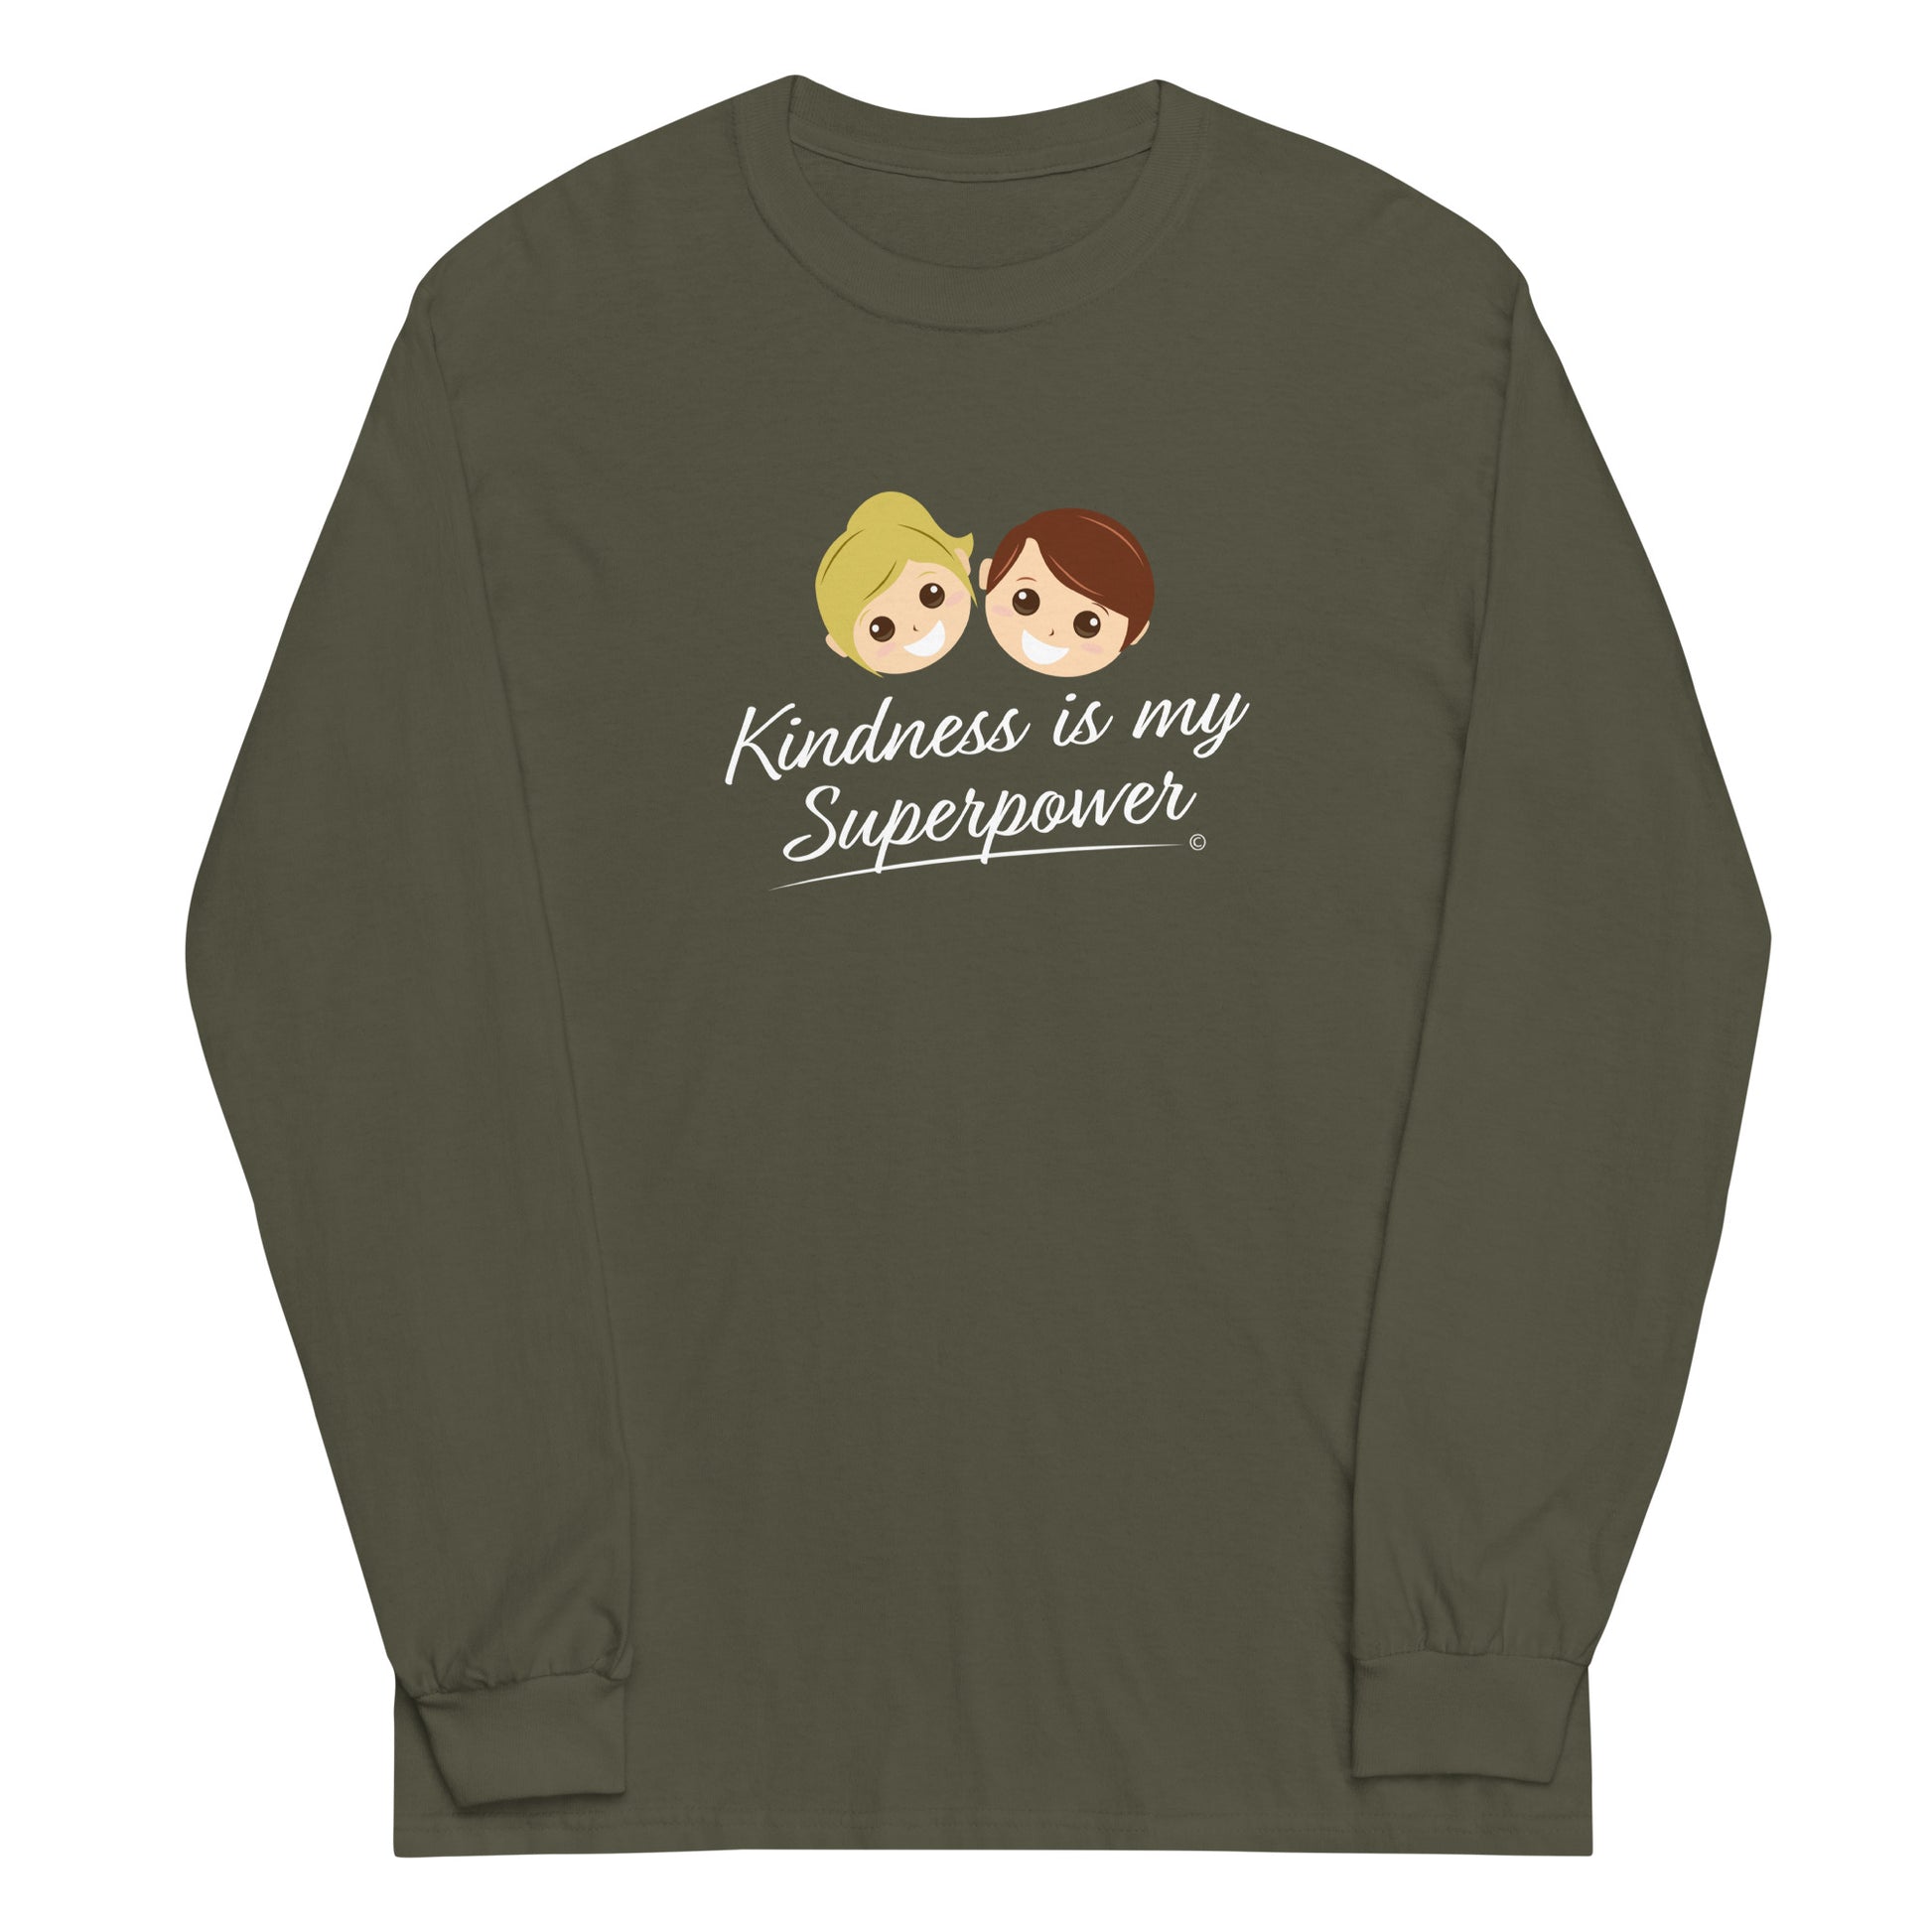 A stylish long sleeve shirt in military green featuring the empowering quote 'Kindness is my Superpower' in bold lettering.